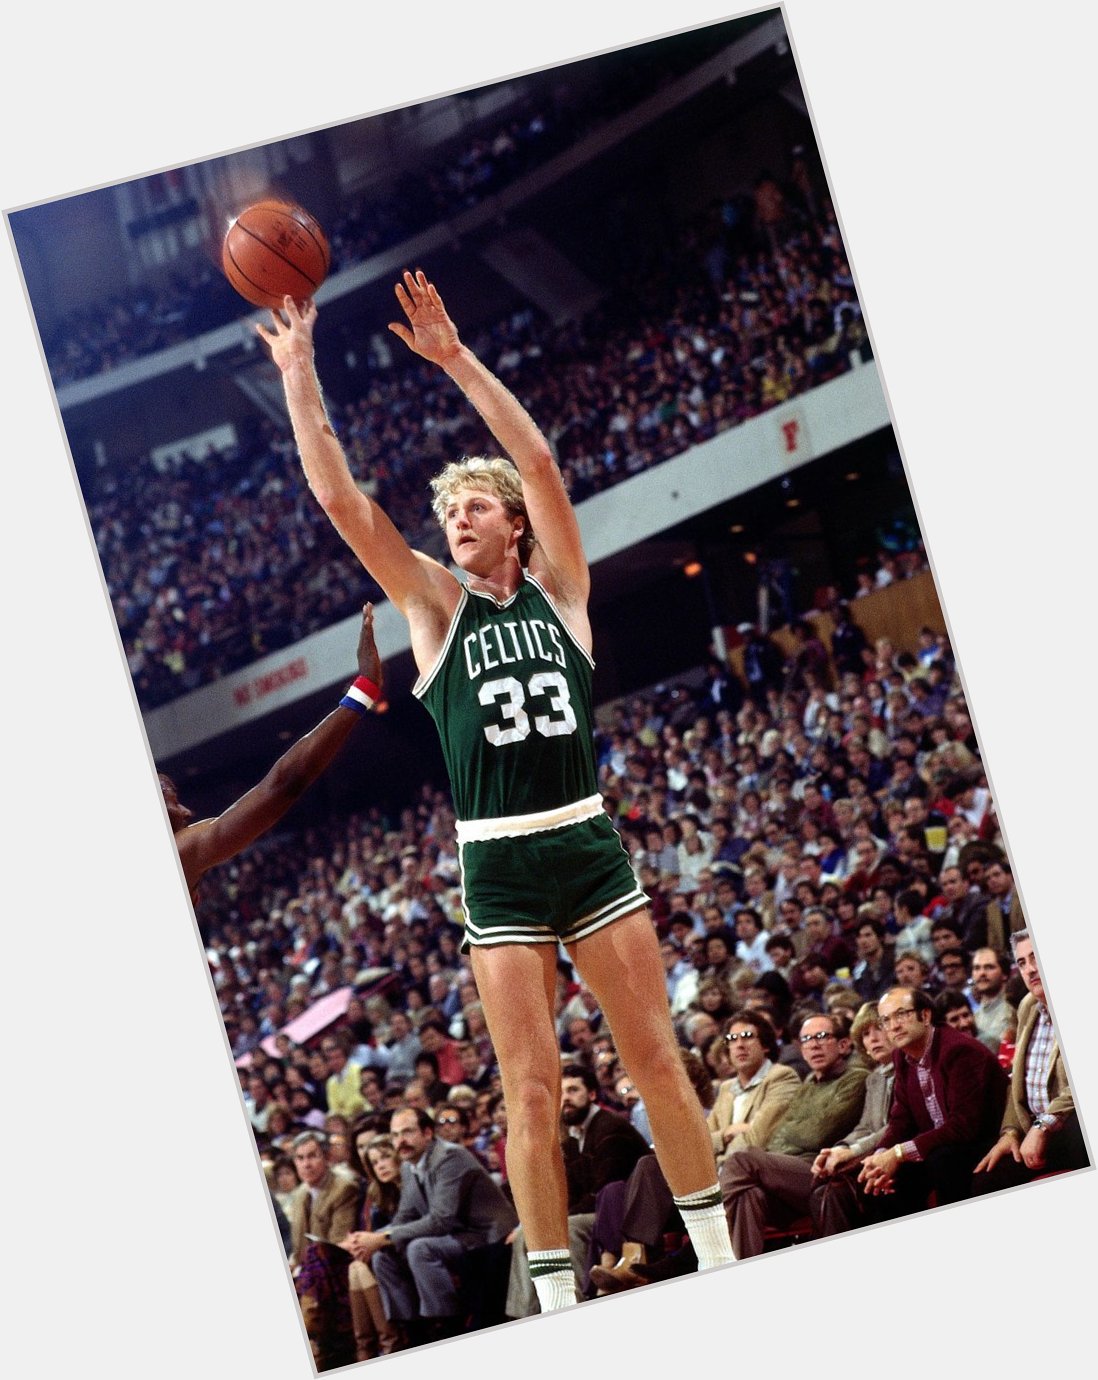 Happy 59th birthday to Larry Bird, the greatest NBA small forward of all time! 